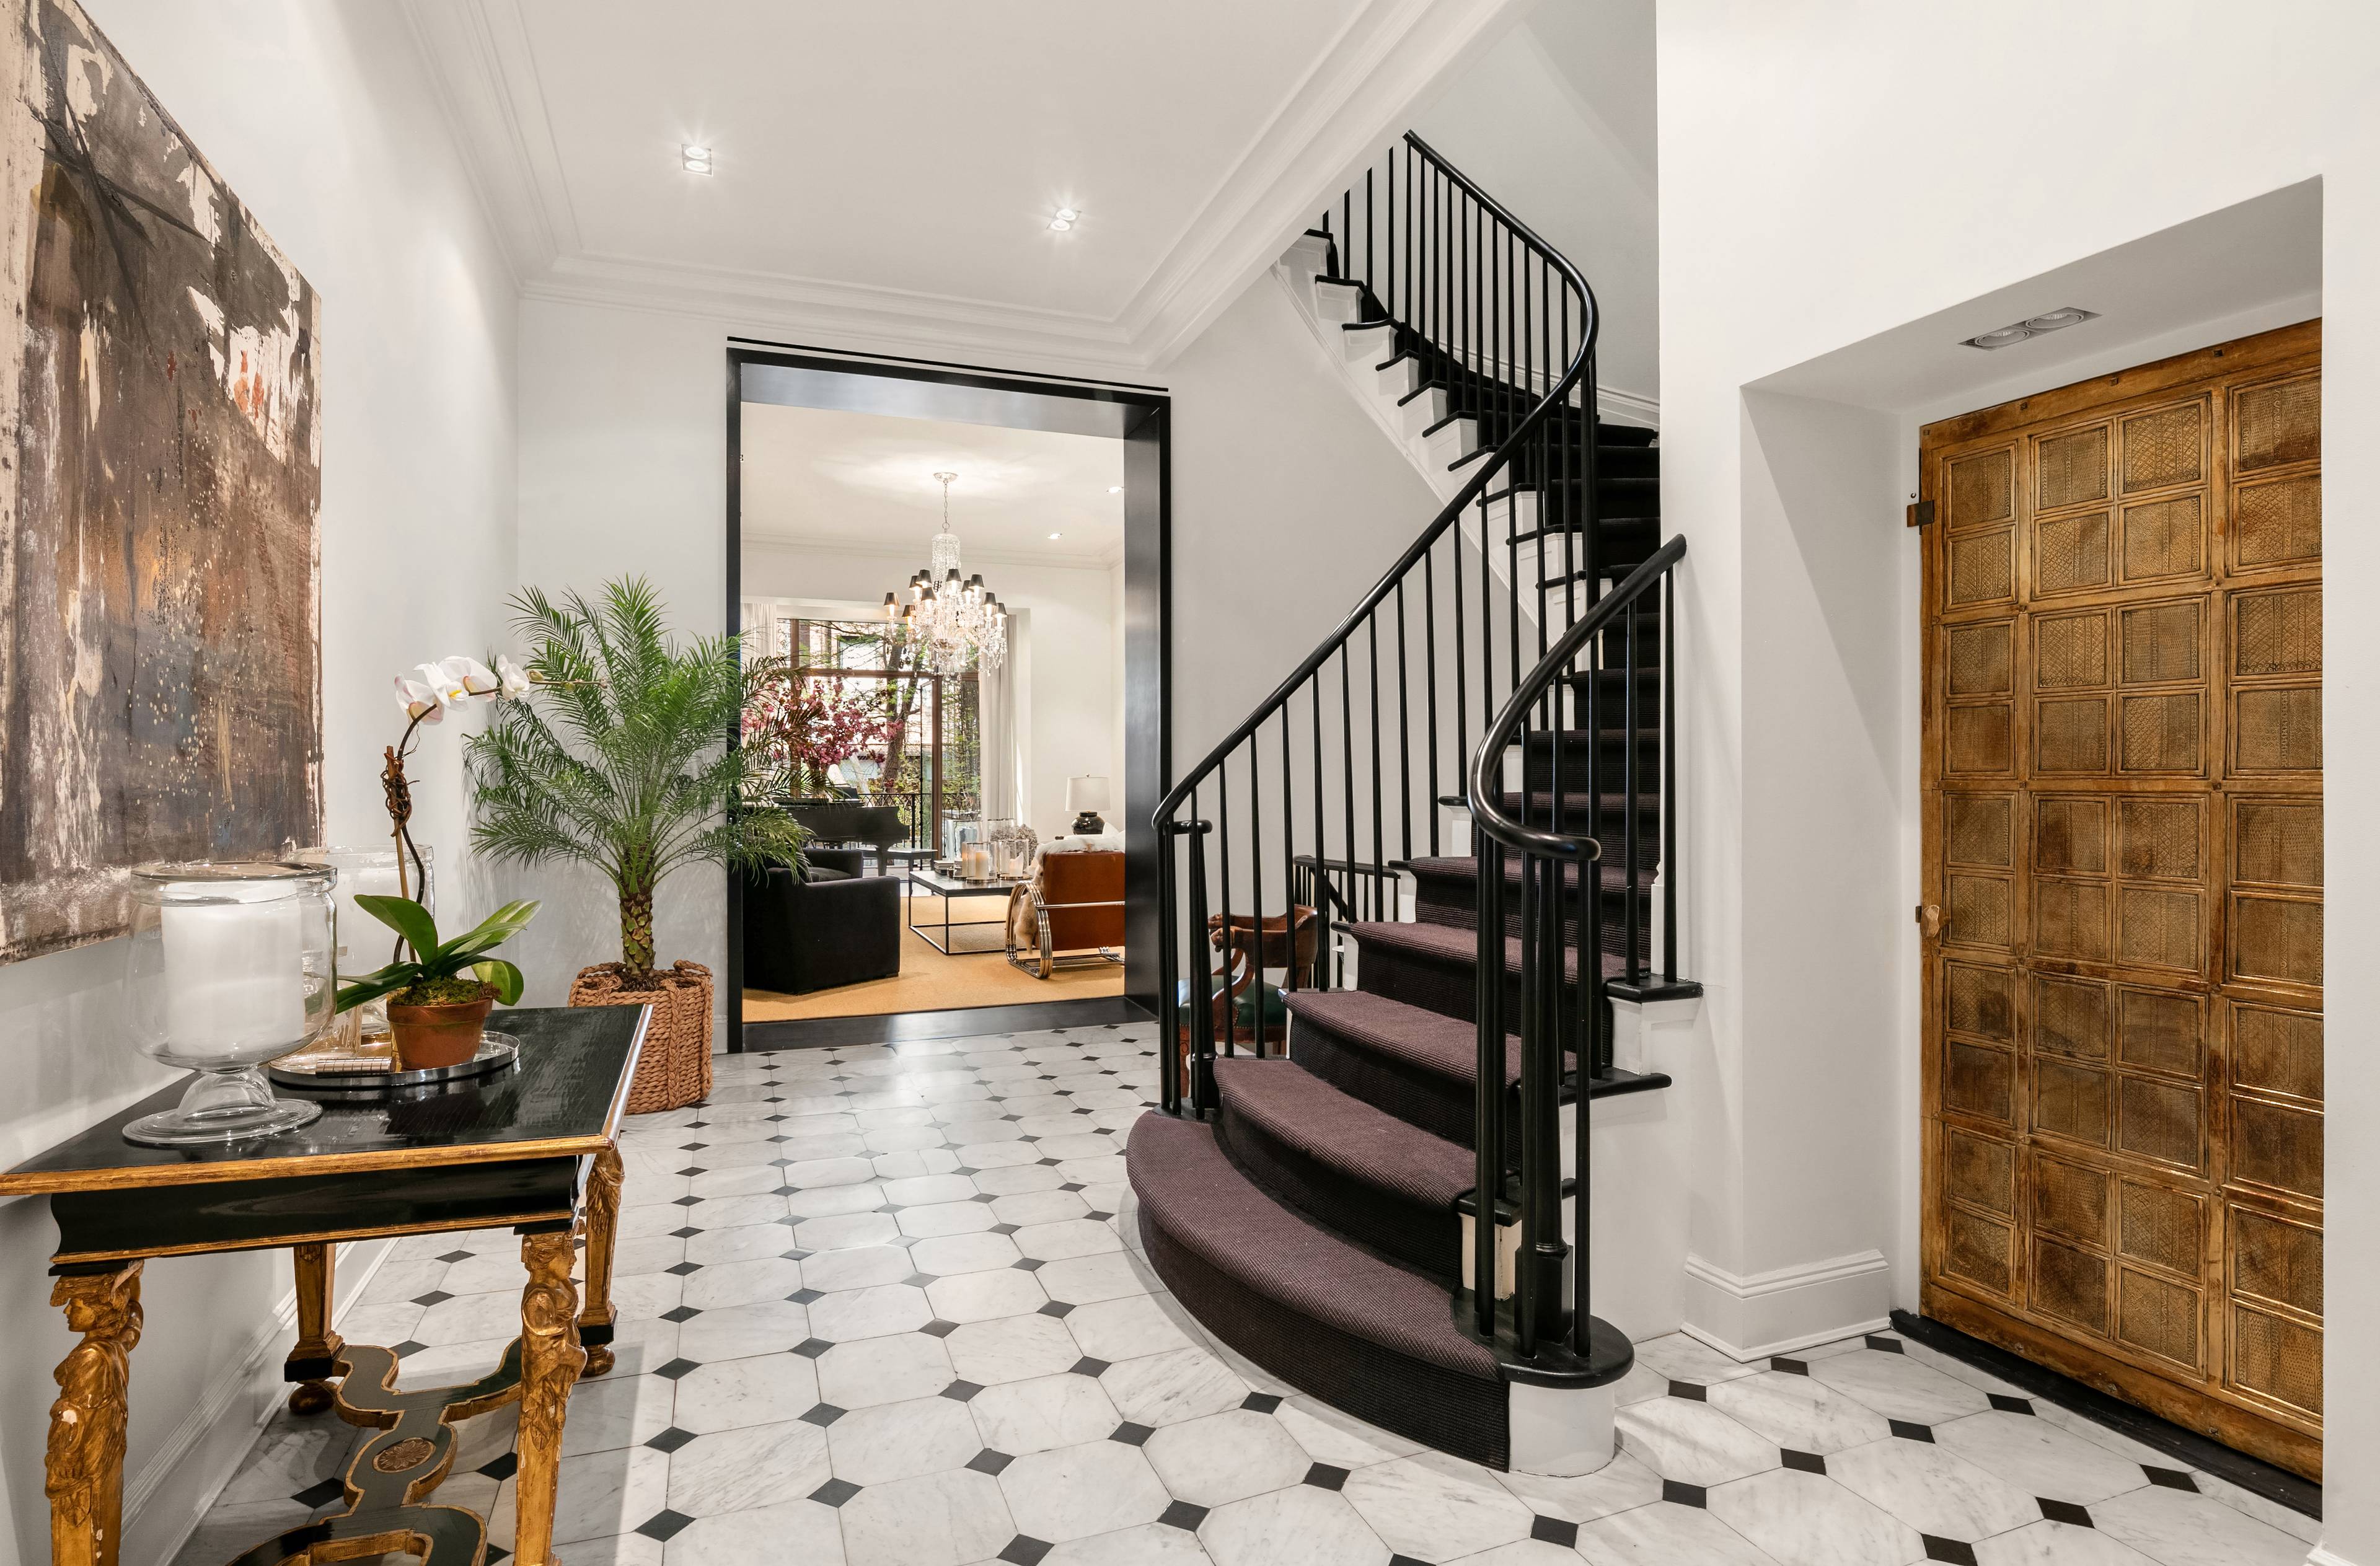 Stunning Renovation off Park Avenue 115 East 38th Street is a stunning, 6 story, fully renovated elevator townhouse located in the Murray Hill Historic District just off Park Avenue.